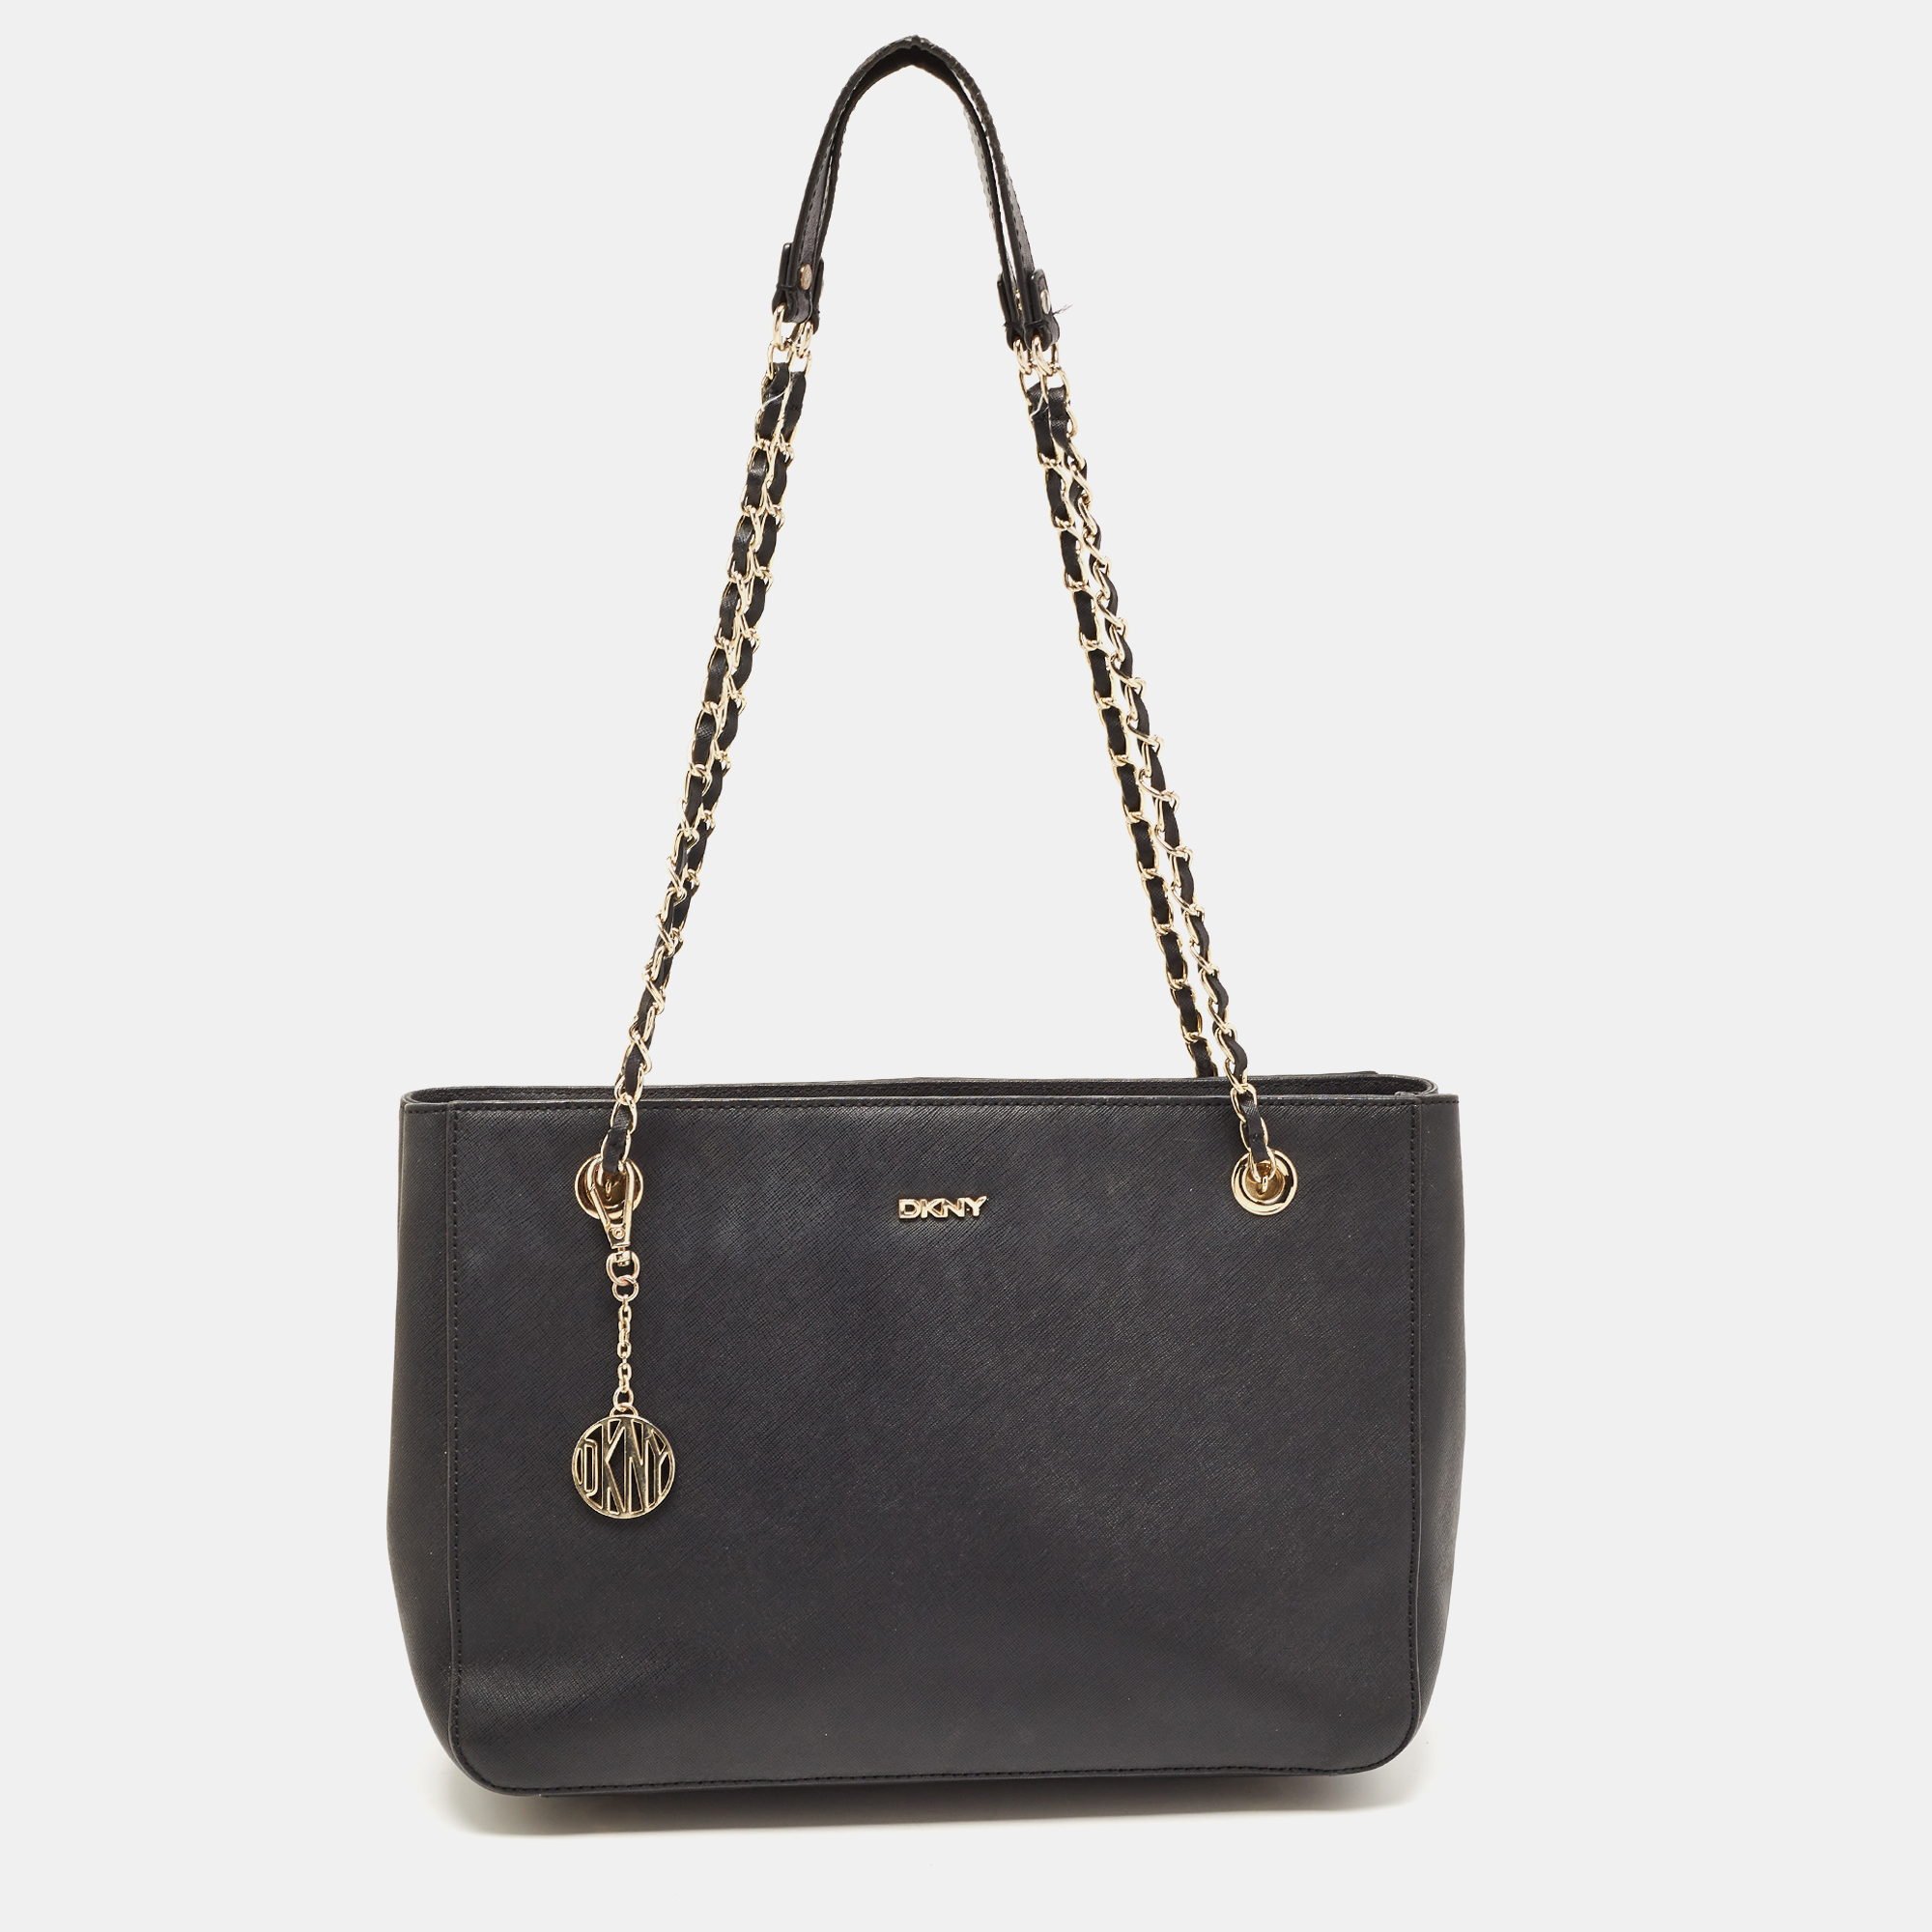 A classic handbag comes with the promise of enduring appeal boosting your style time and again. This designer bag is one such creation. It's a fine purchase.